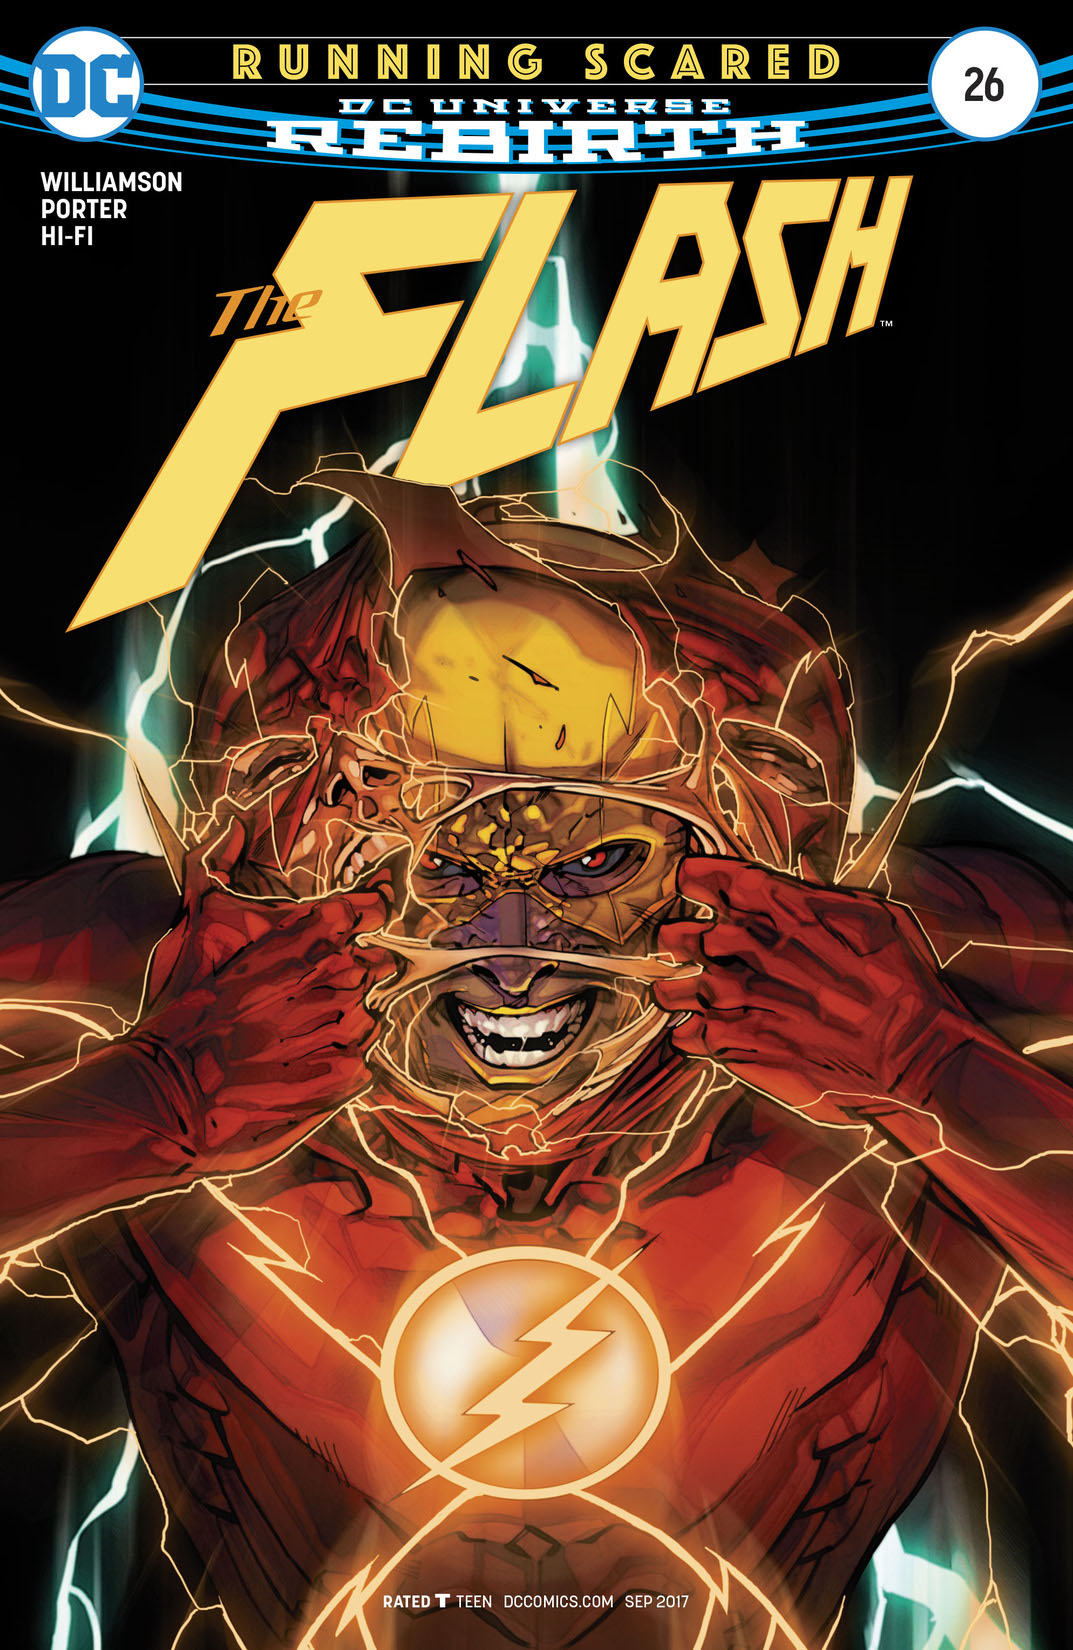 The Flash (2016-) #26 preview images